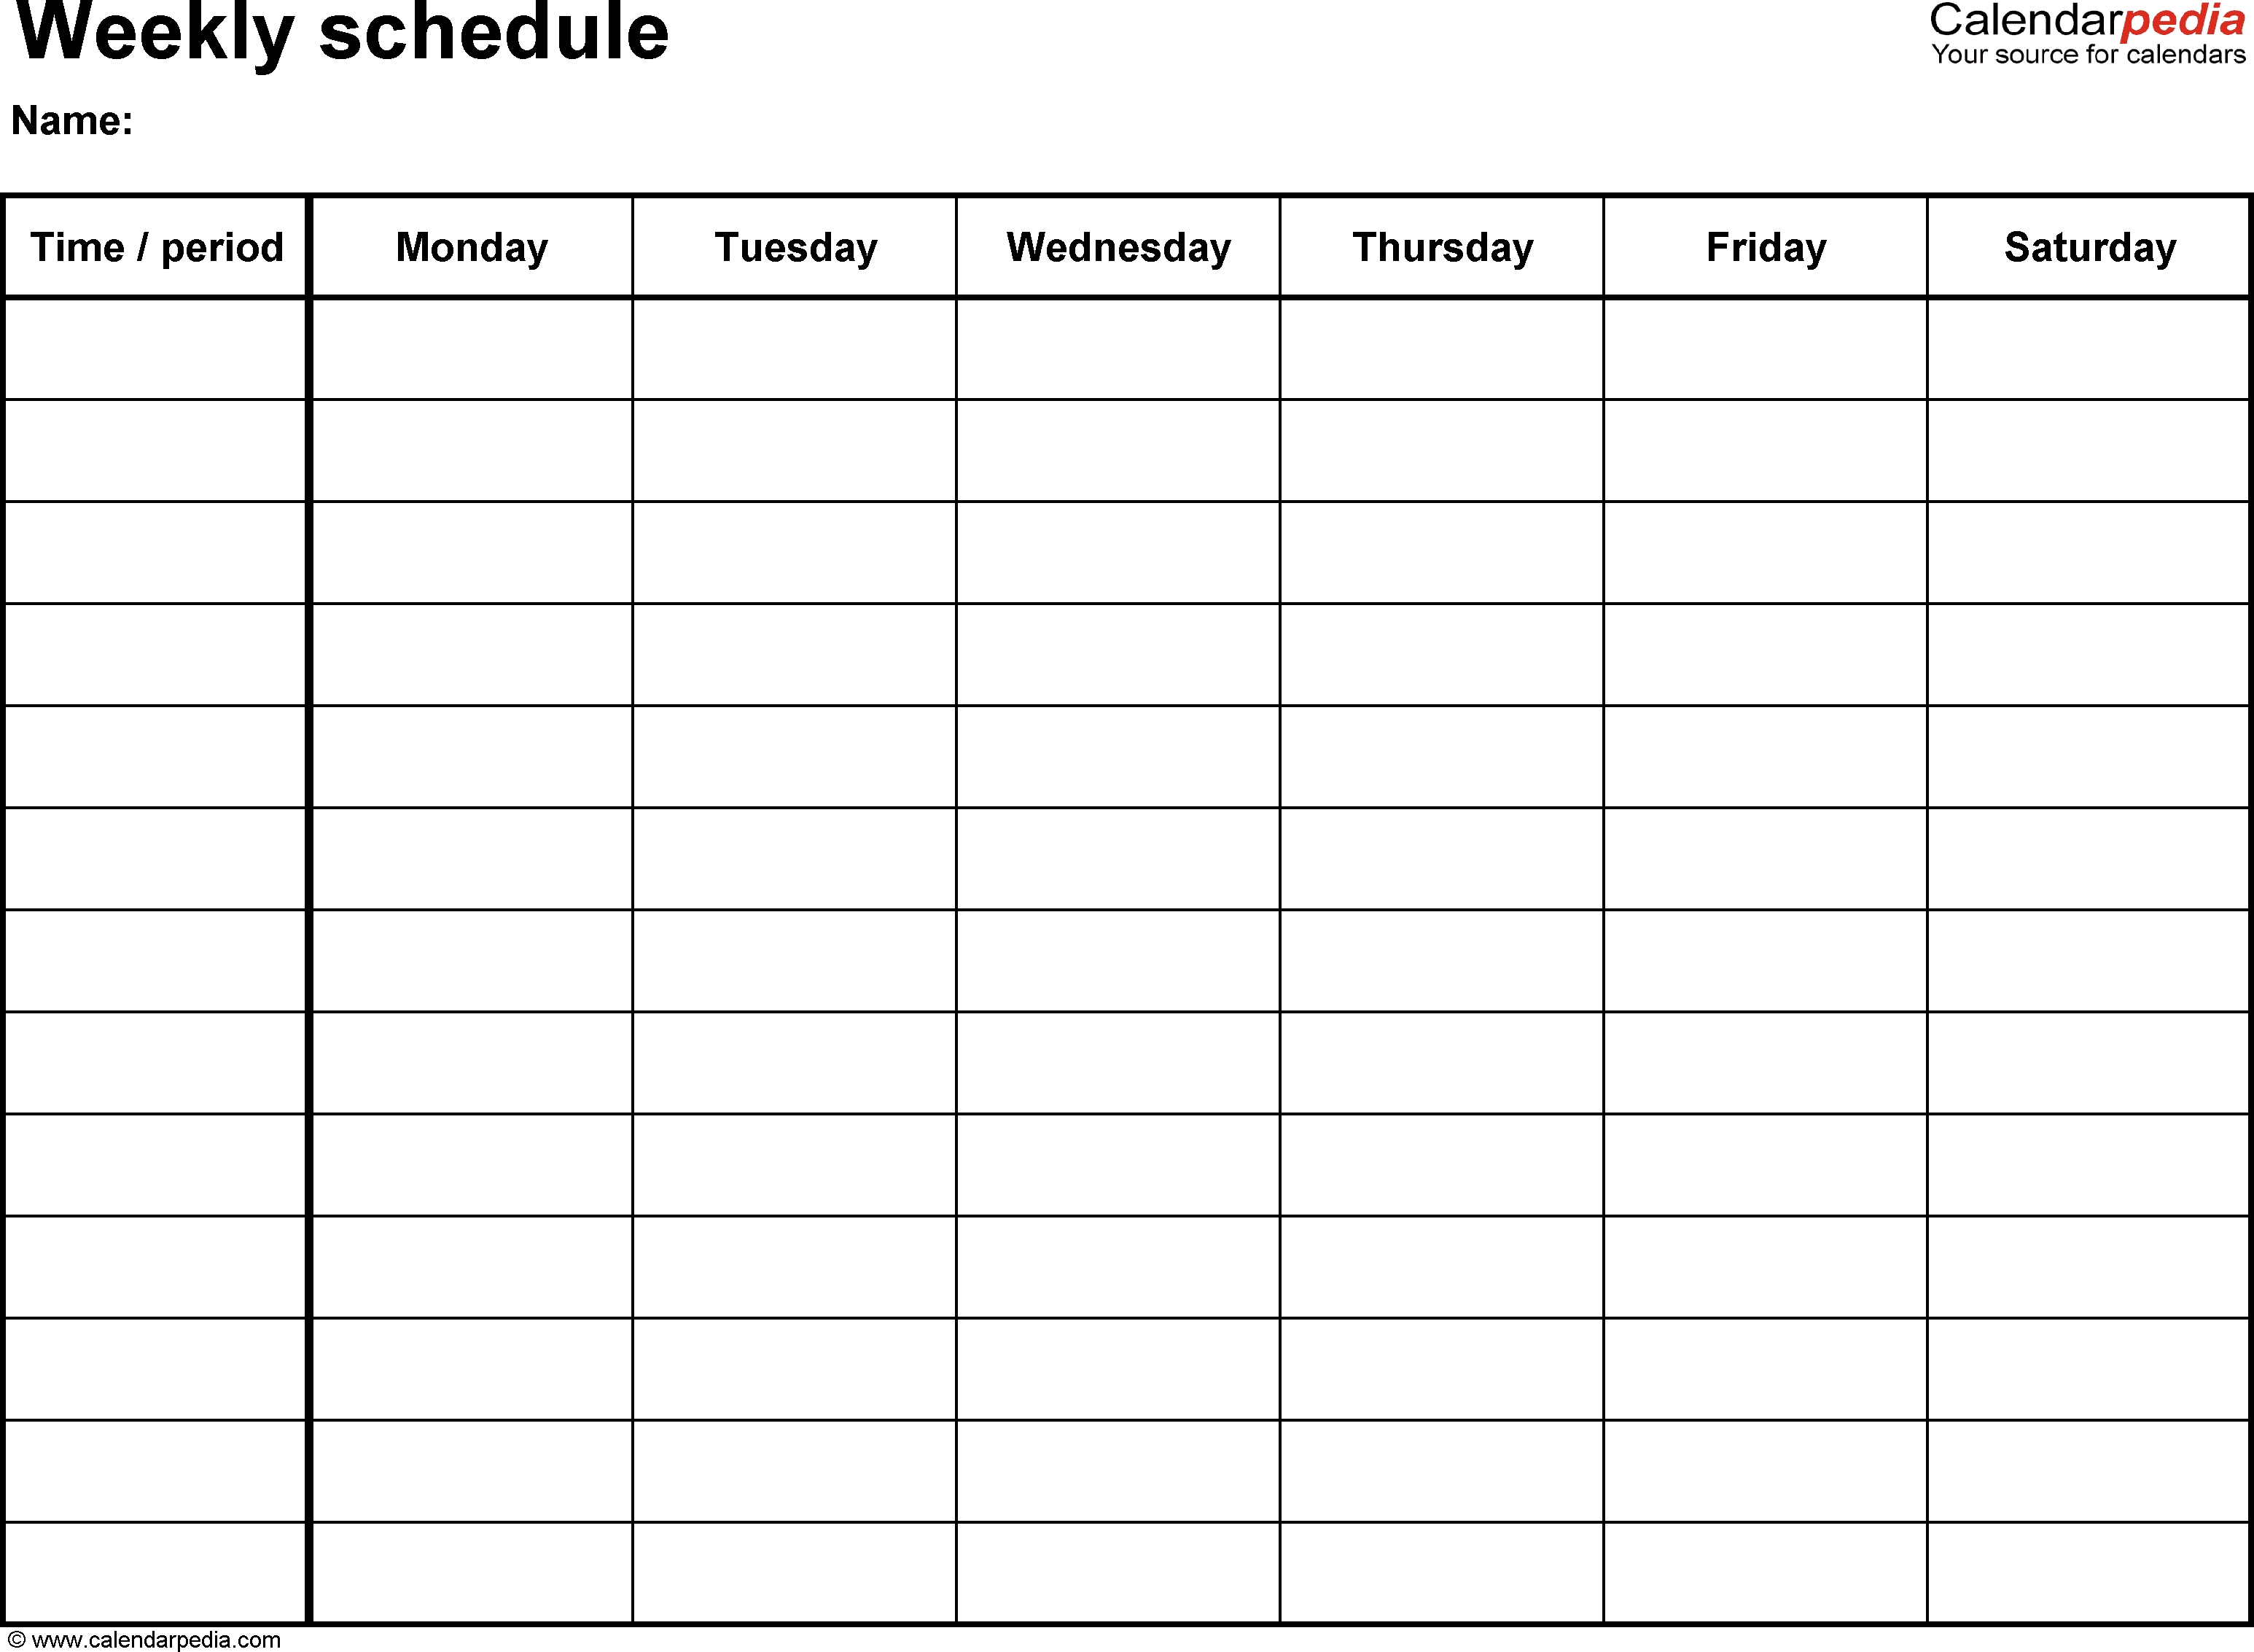 Free Weekly Schedule Templates For Word - 18 Templates intended for Summer Camp Schedule Template Blank